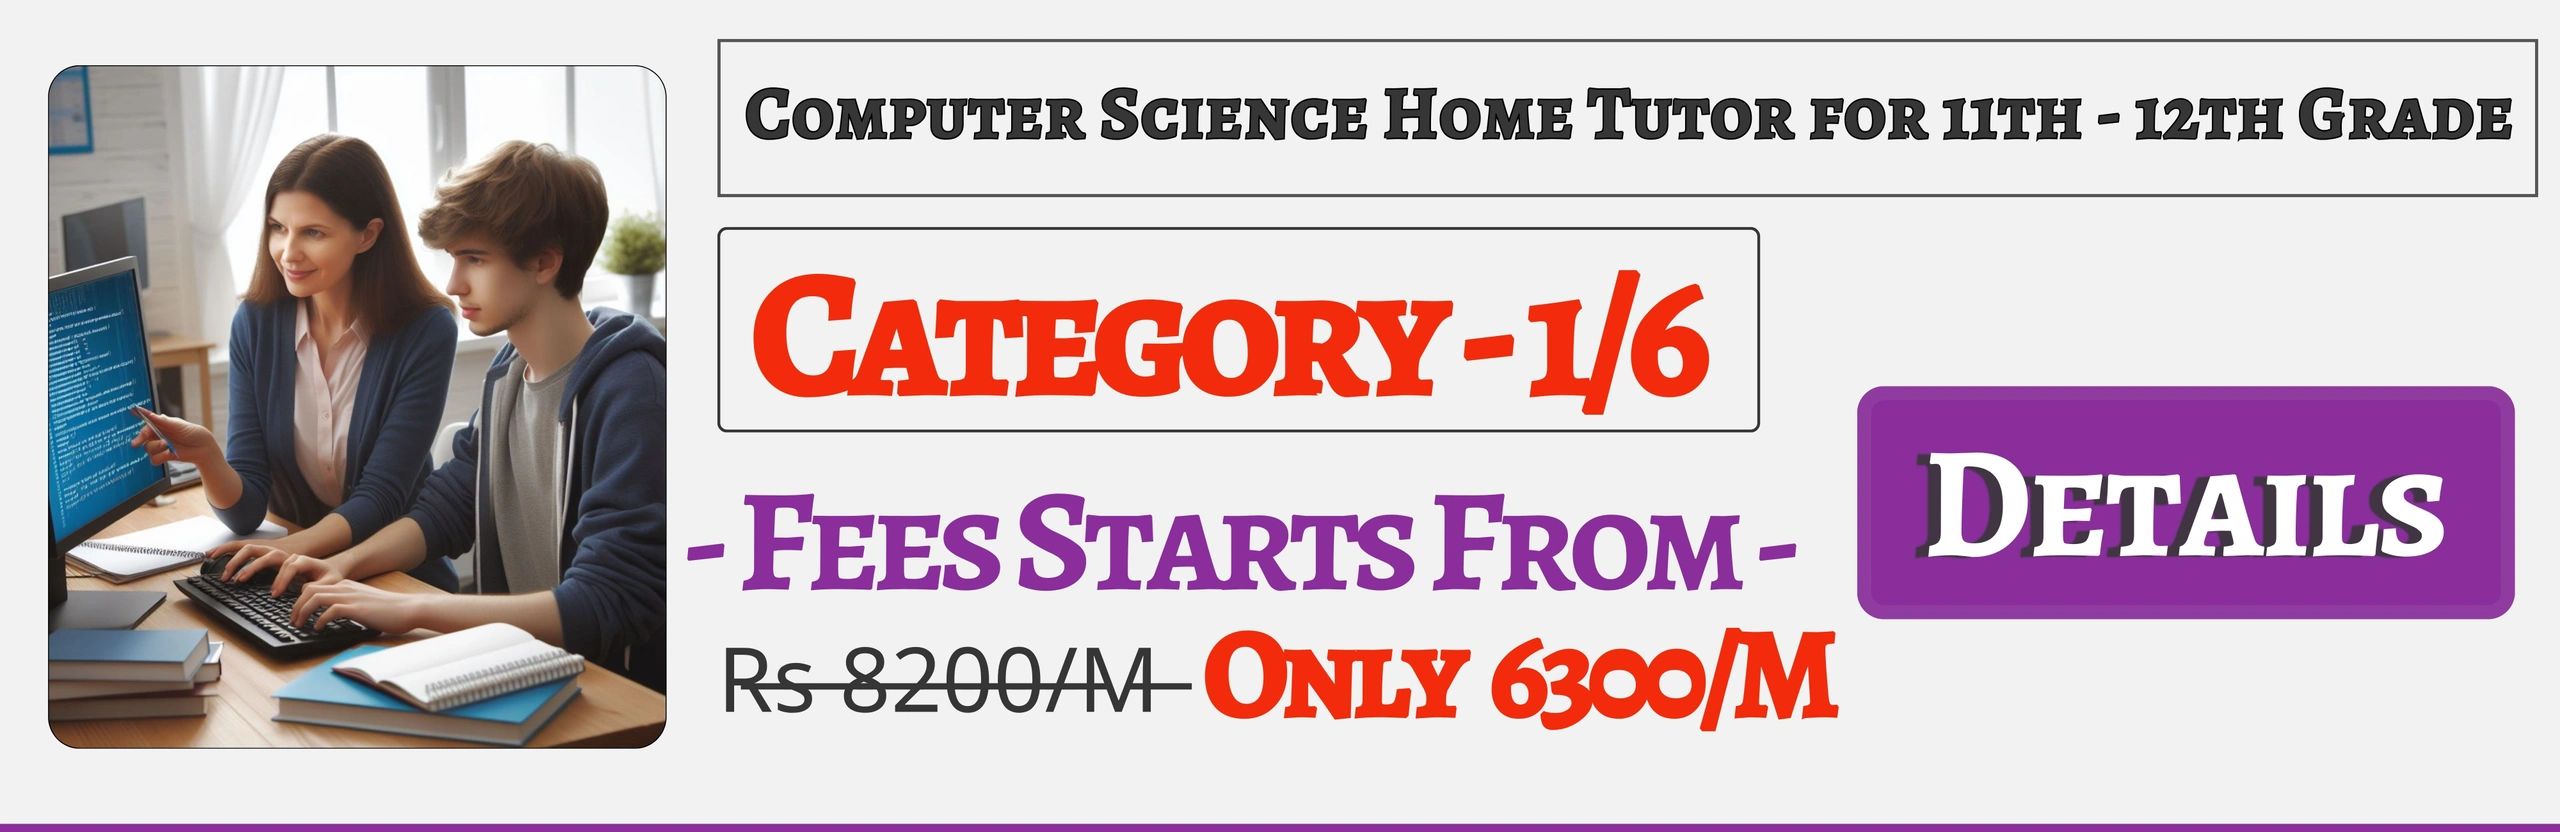 Book Best Nearby Computer Science Home Tuition Tutors For 11th & 12th In Jaipur , Fees Only 6300/M